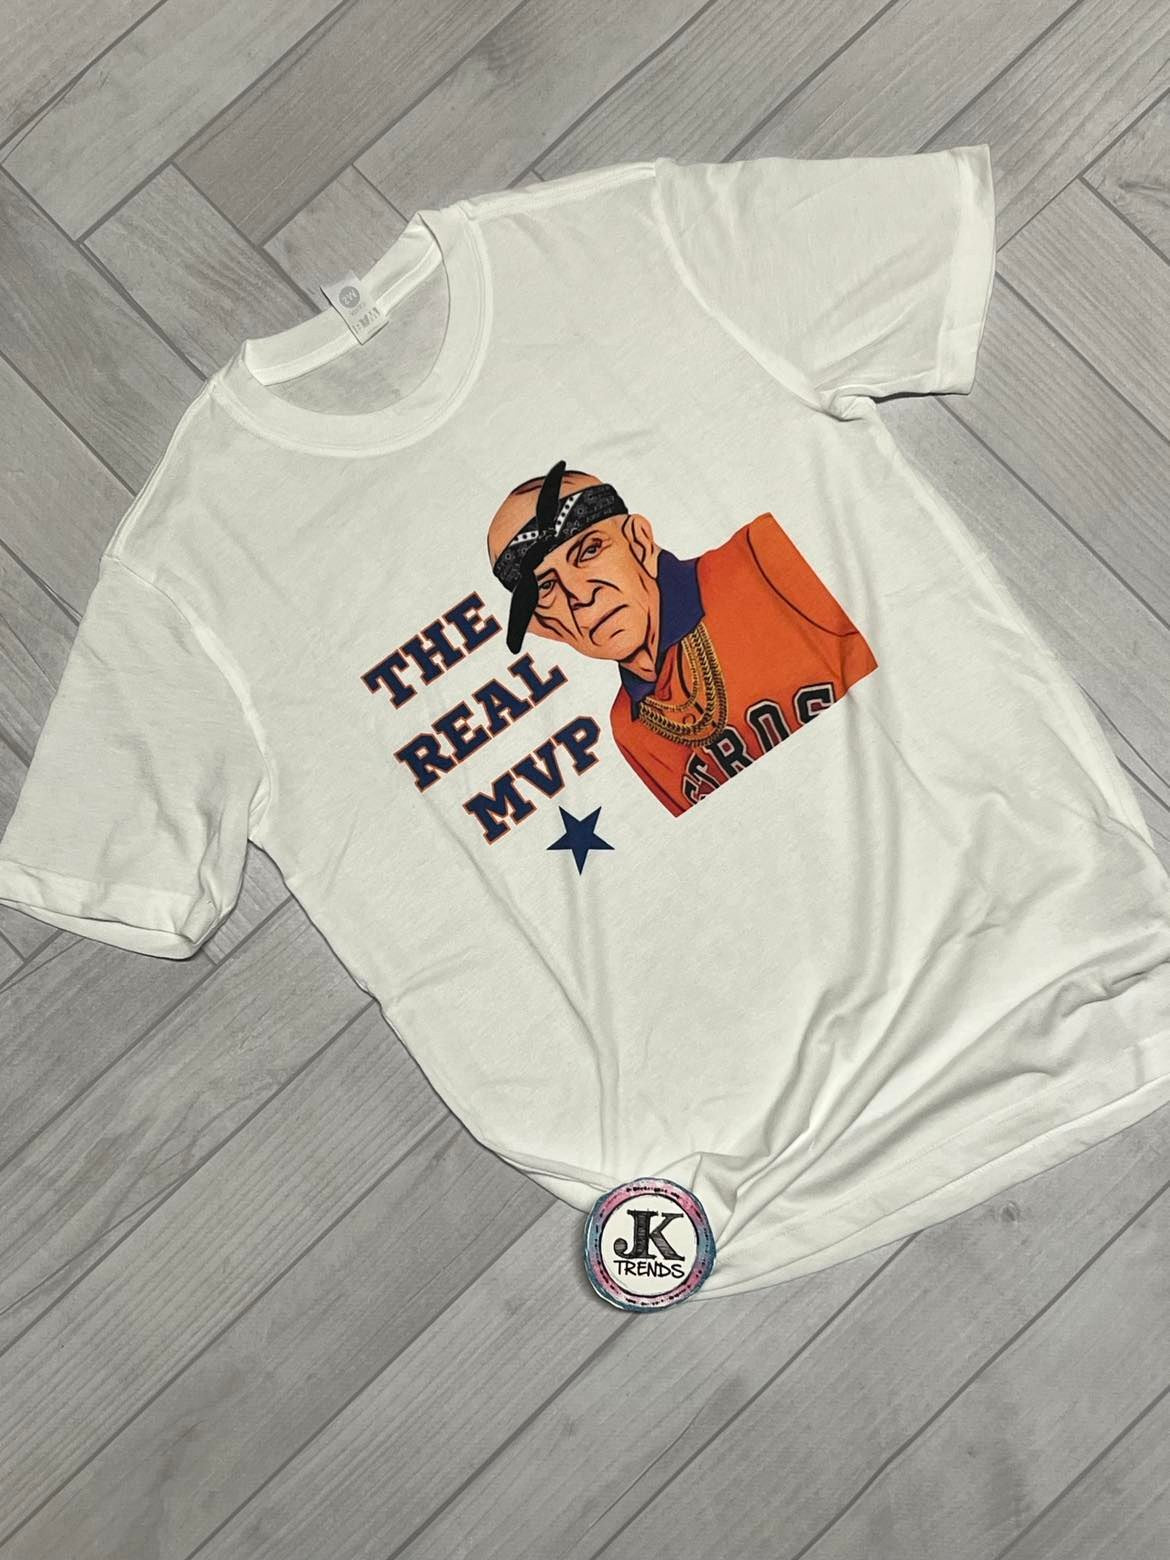 Official Houston Astros Mattress Mack Haters Gonna Hate 2022 shirt